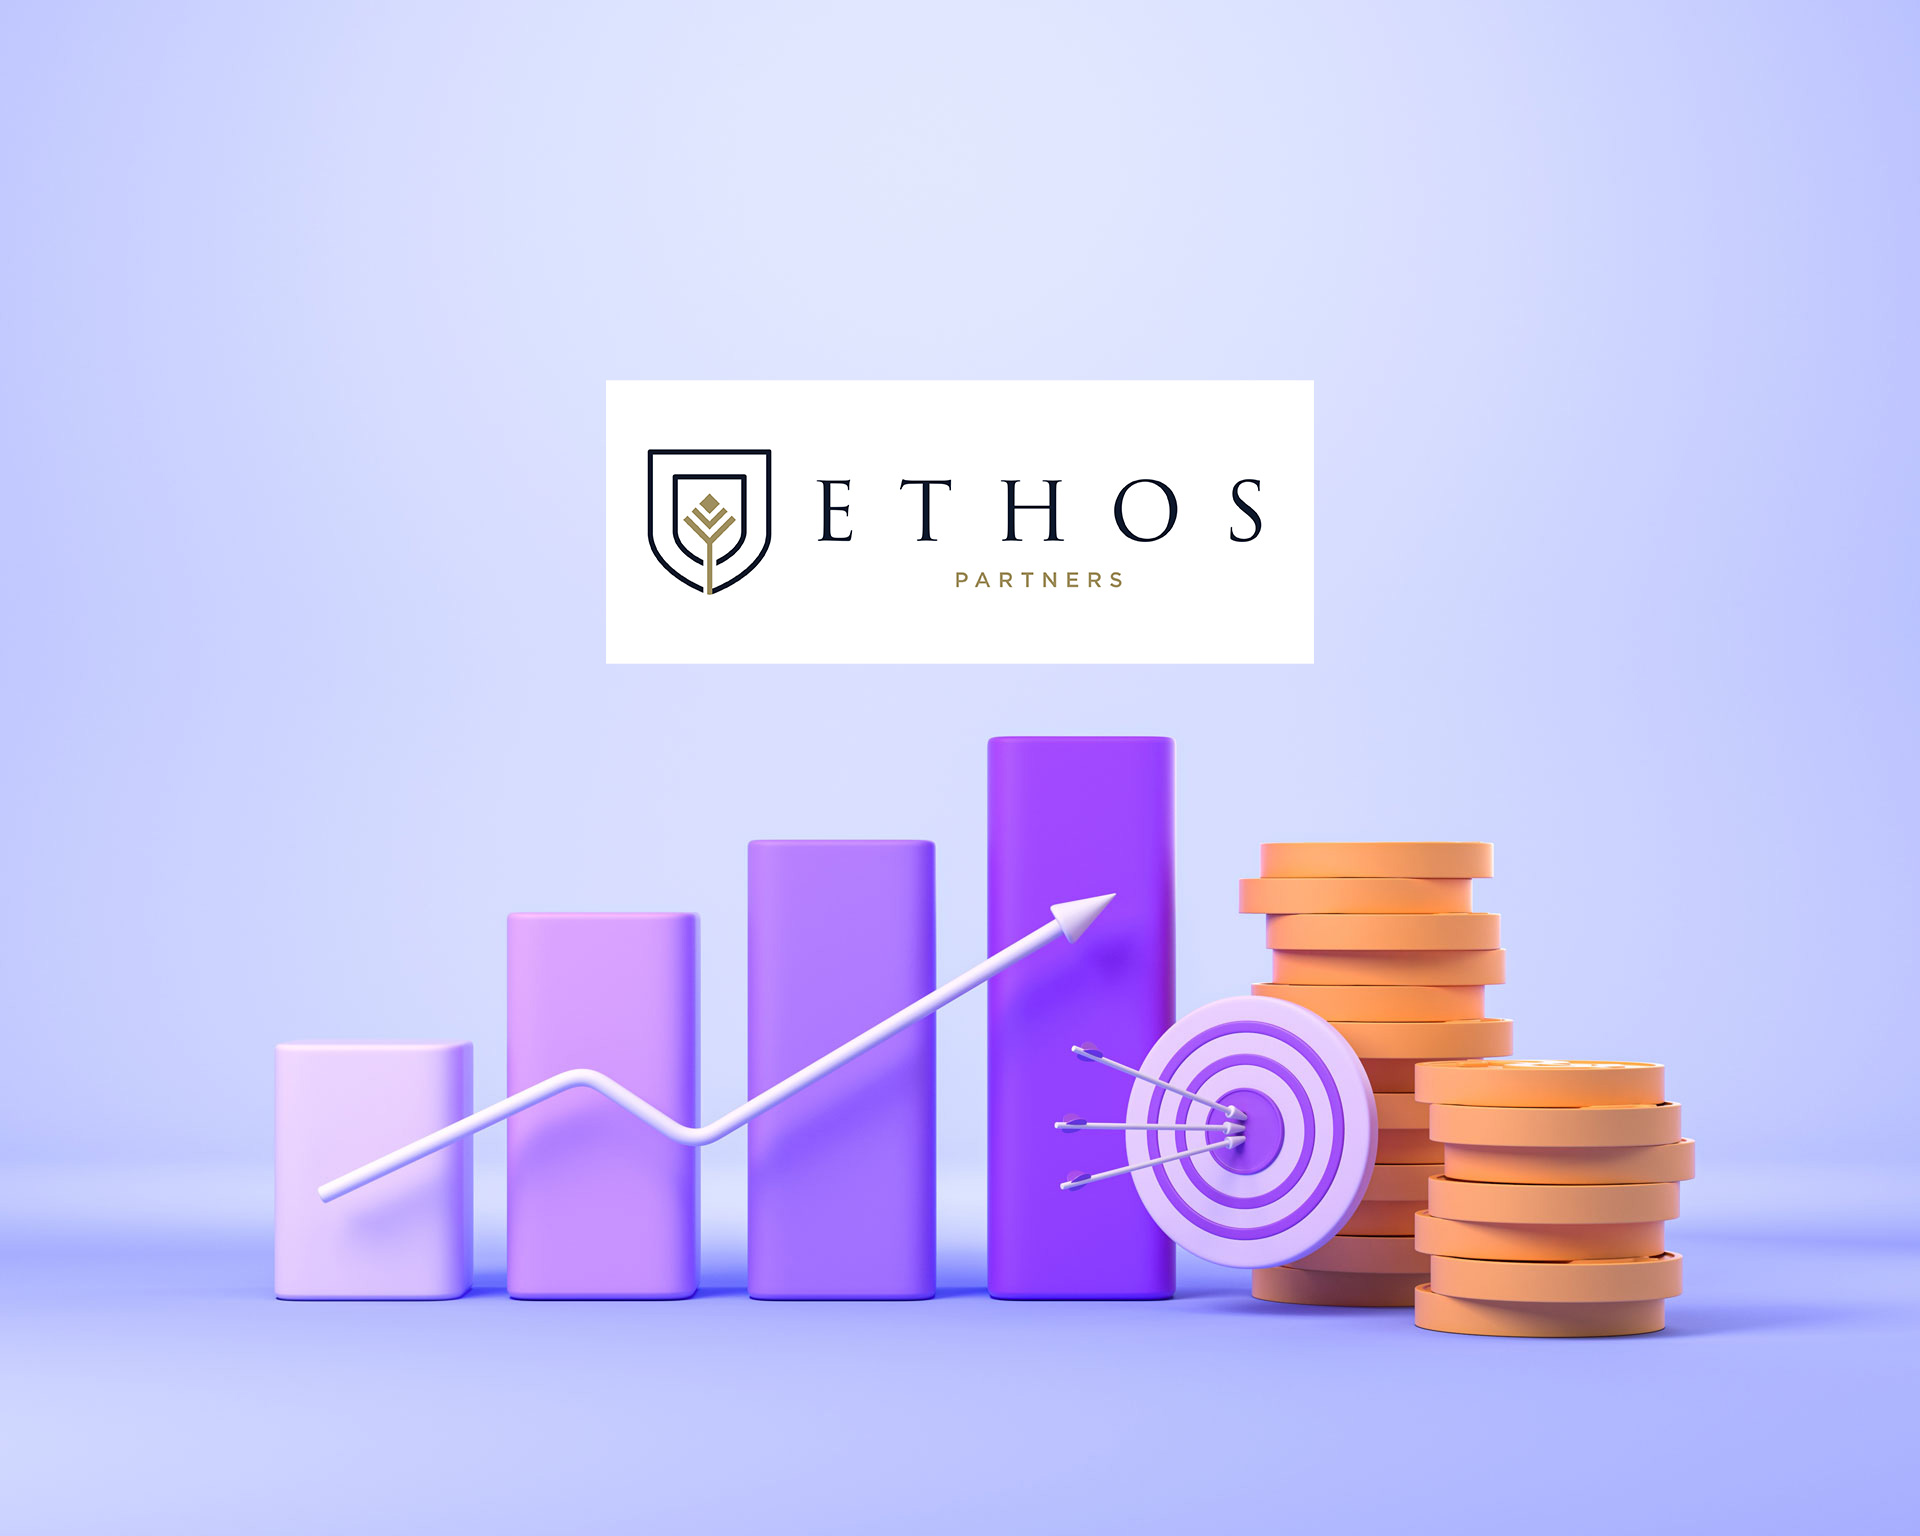 IPI secures equity share investment from Ethos Partners